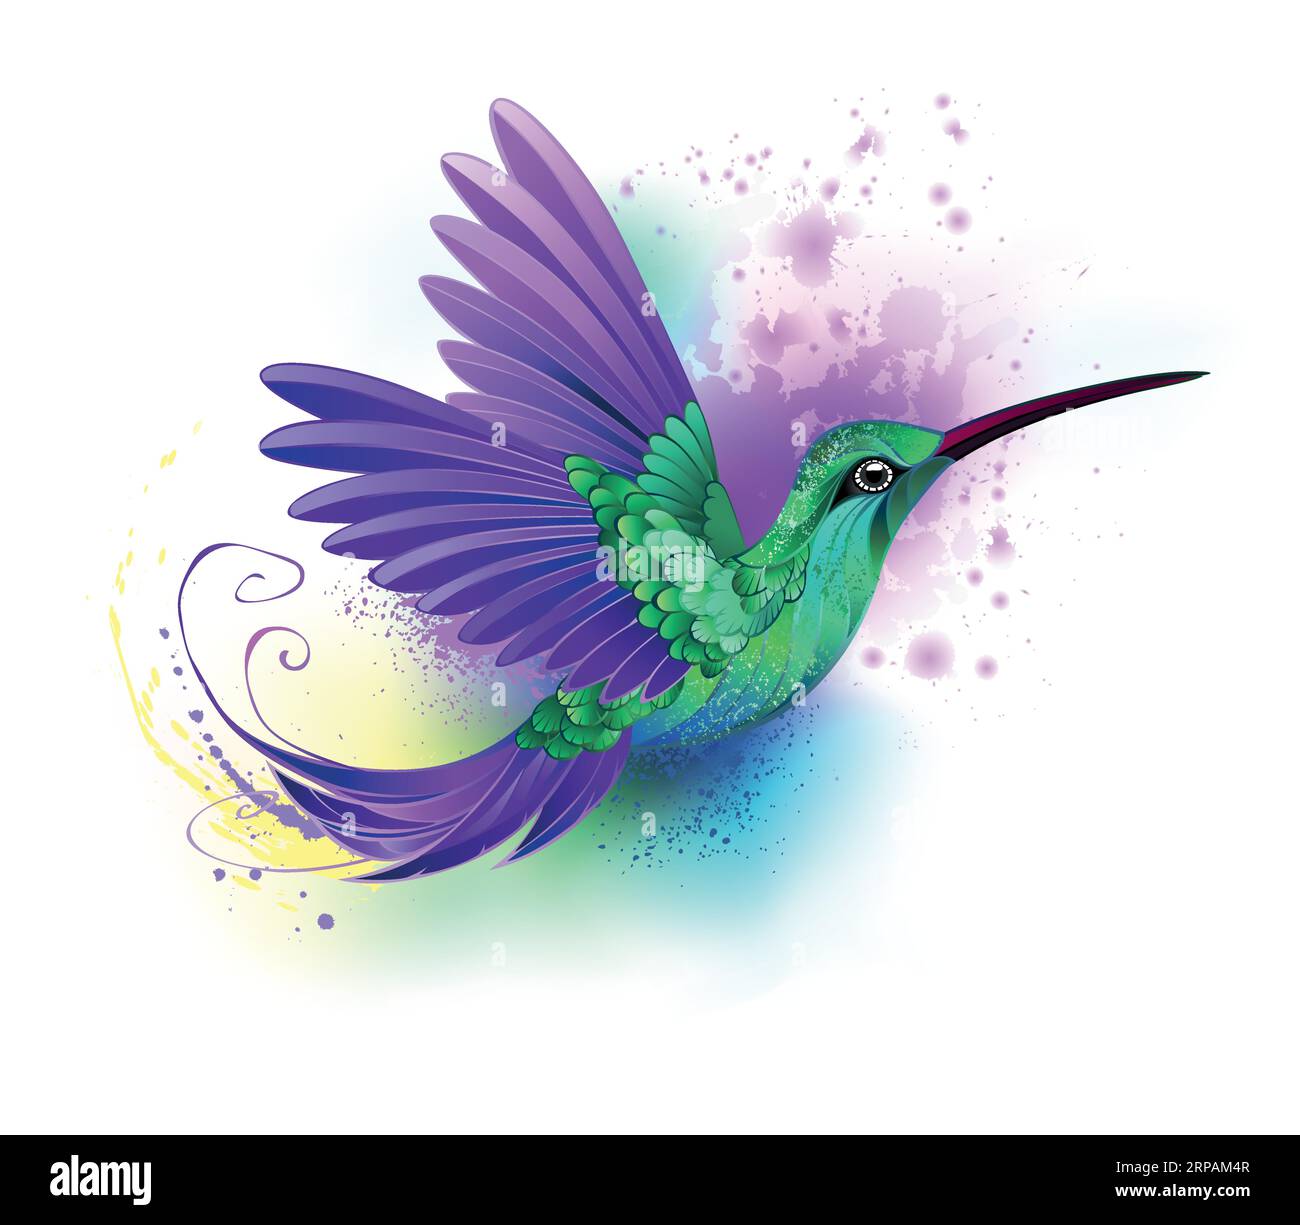 Artistically drawn, green hummingbird with purple wings and textured, iridescent plumage flies on white background with splashes of watercolor paint. Stock Vector